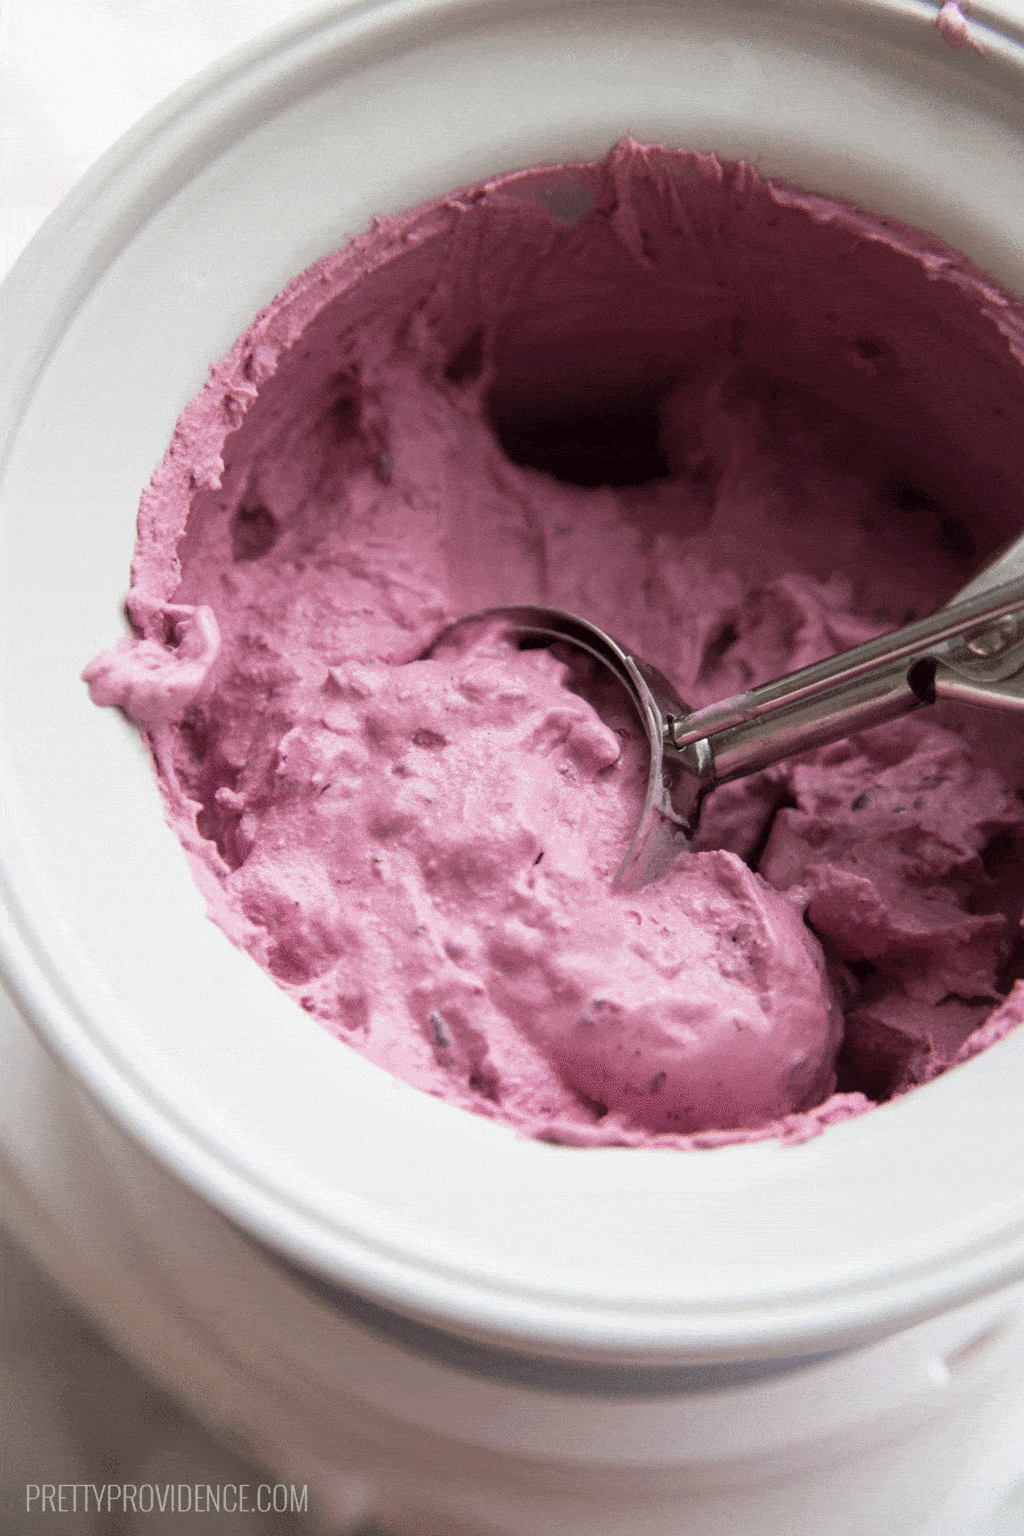 Scooping a scoop of fresh blackberry ice cream out of the ice cream maker.